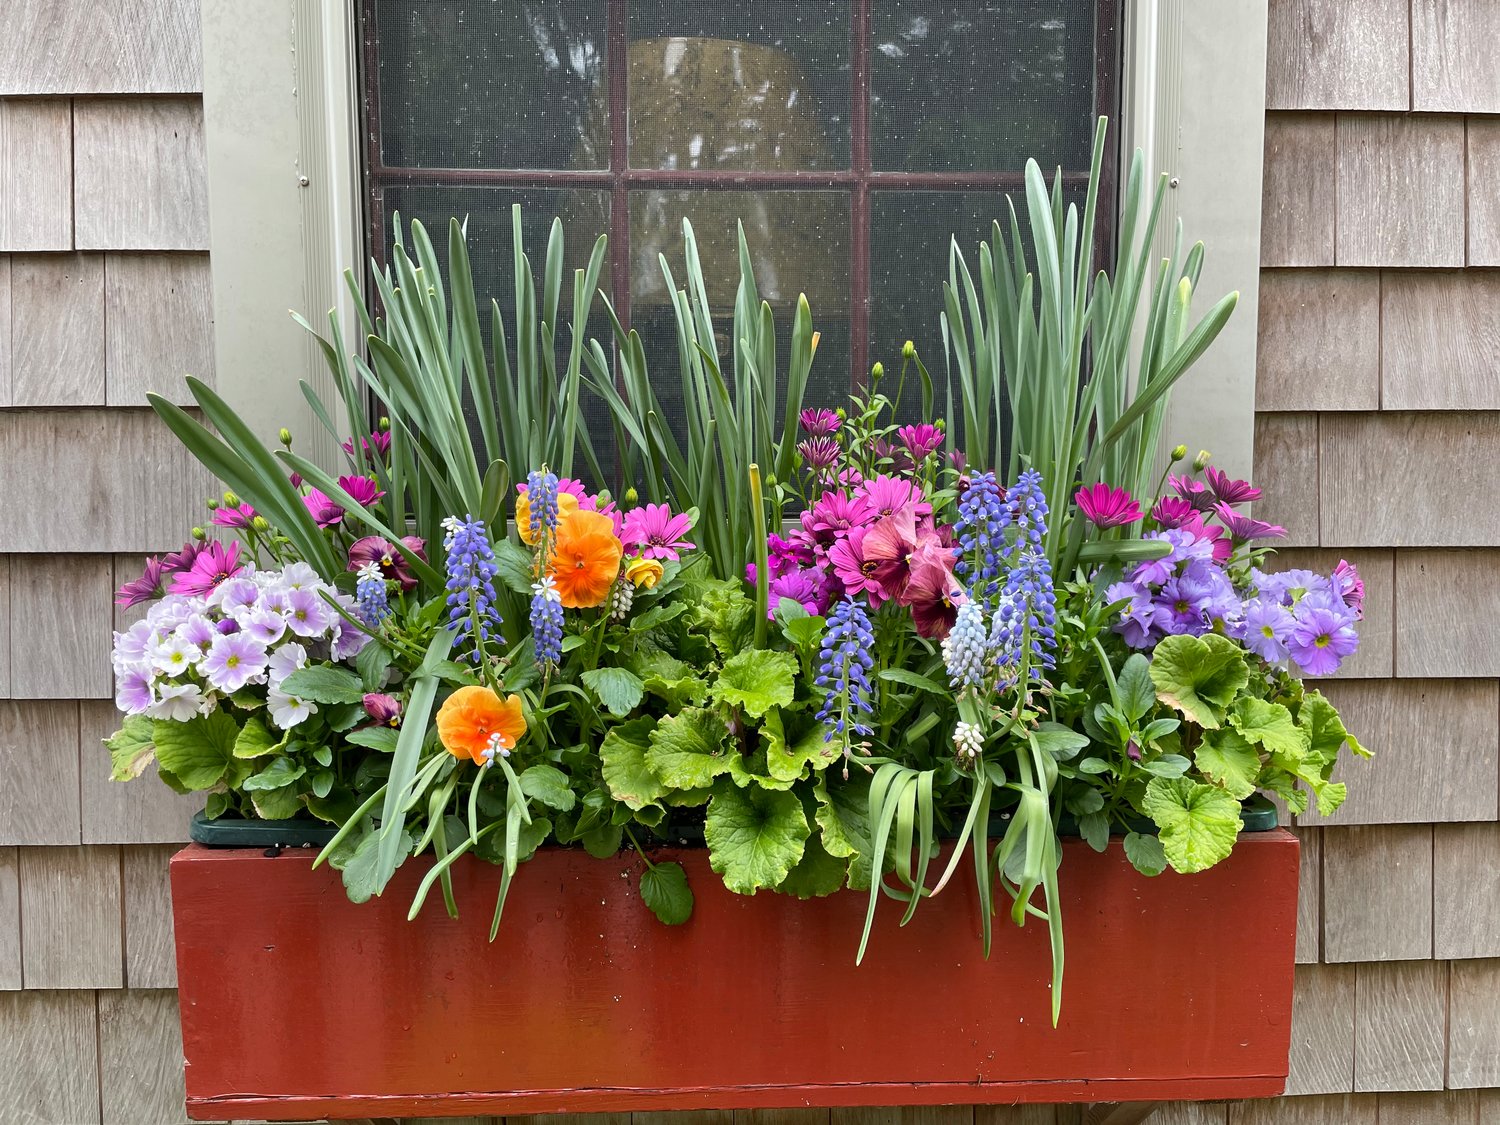 A Hussey Street flower box May 22.